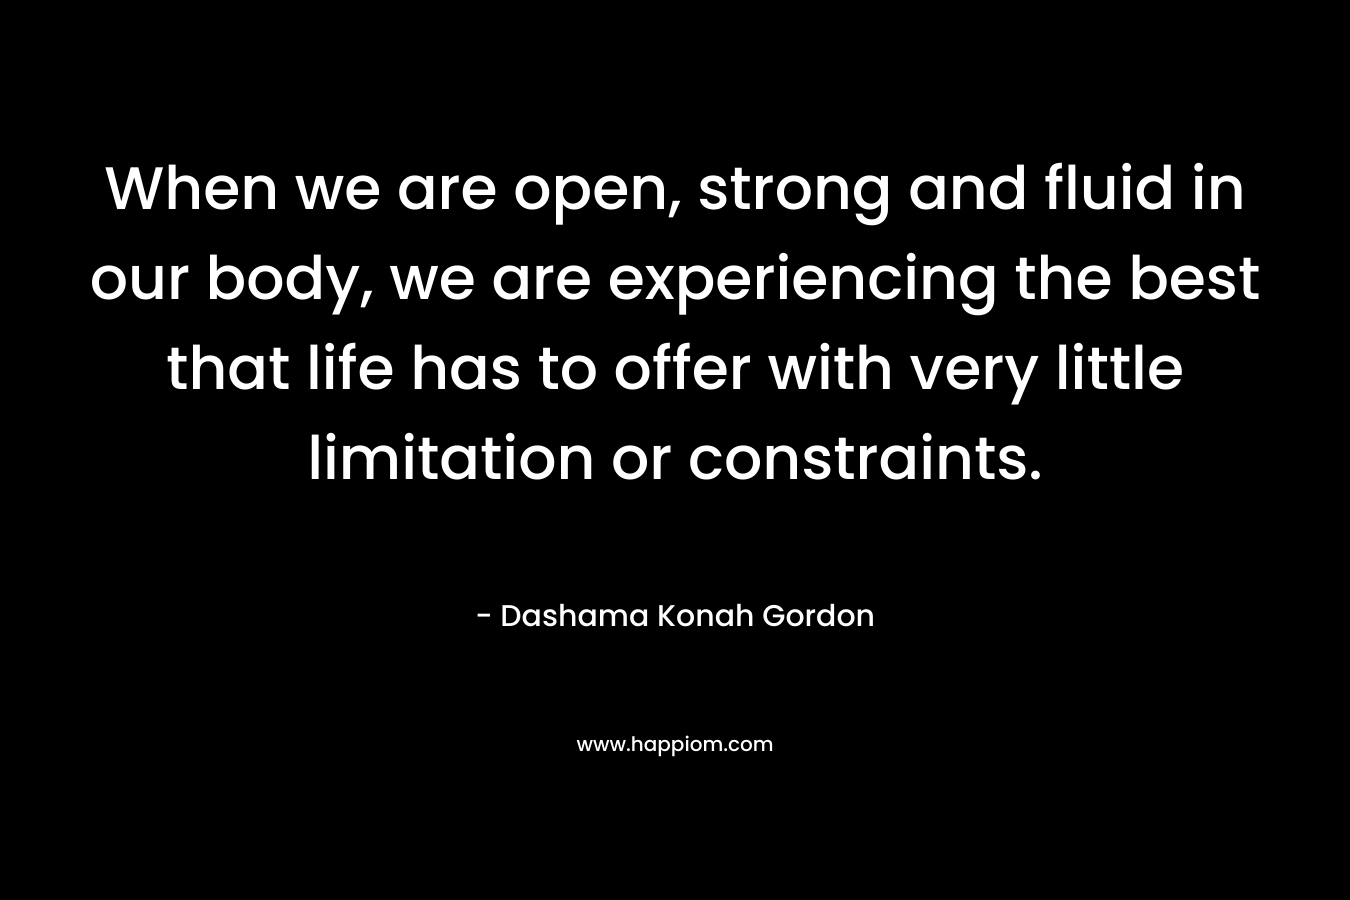 When we are open, strong and fluid in our body, we are experiencing the best that life has to offer with very little limitation or constraints. – Dashama Konah Gordon